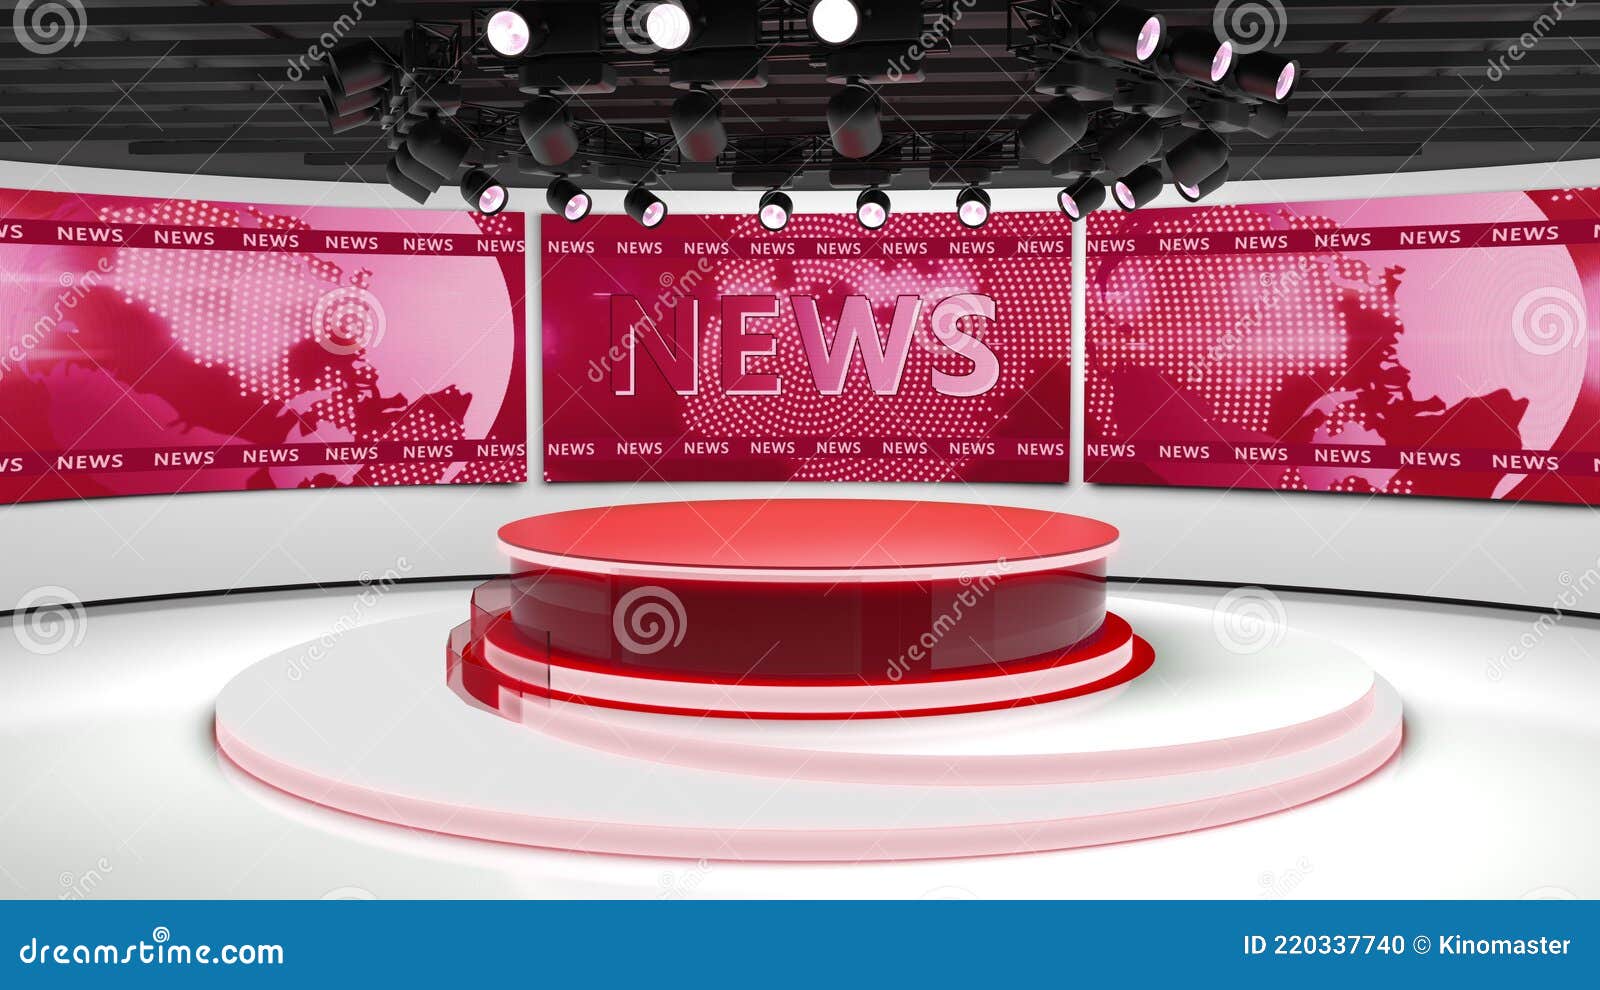 green screen background images newsroom